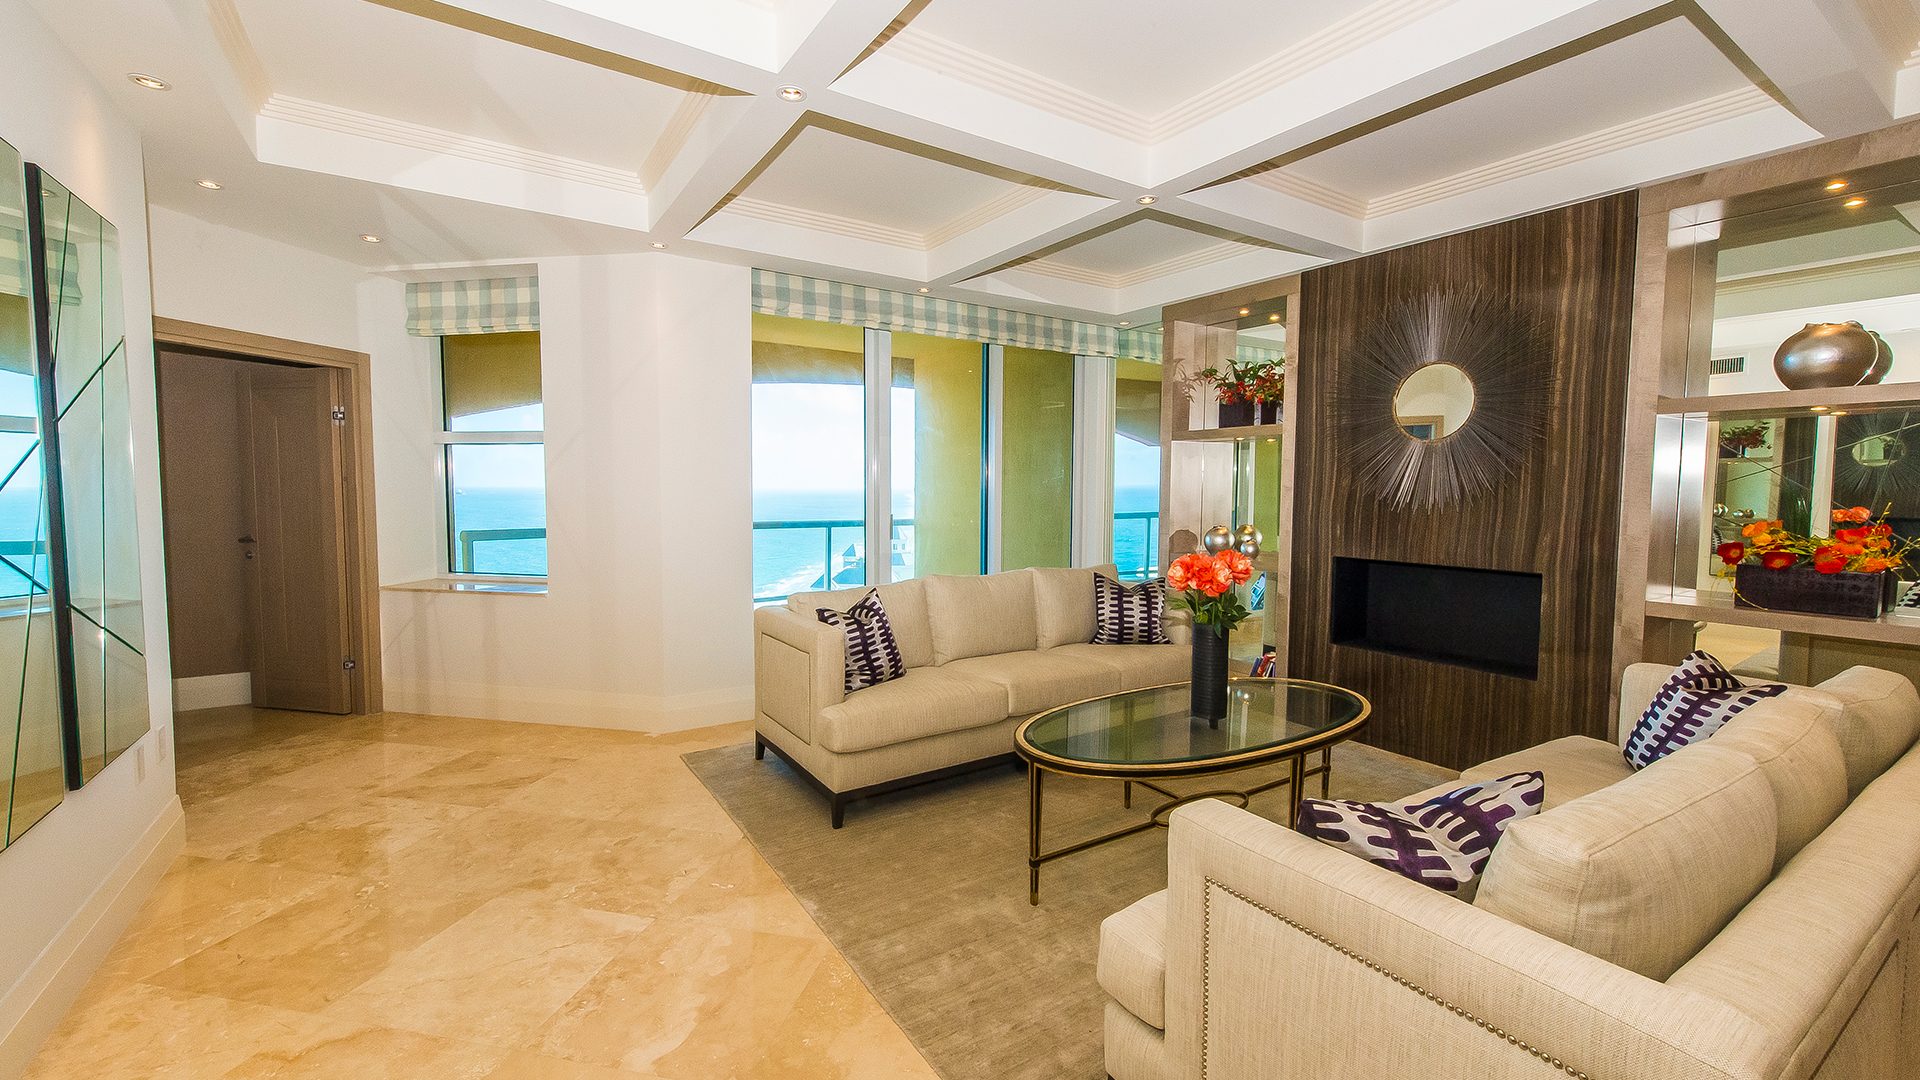 Residence 24A, Tower II at The Palms, Luxury Oceanfront Condominiums Fort Lauderdale, Florida 33305